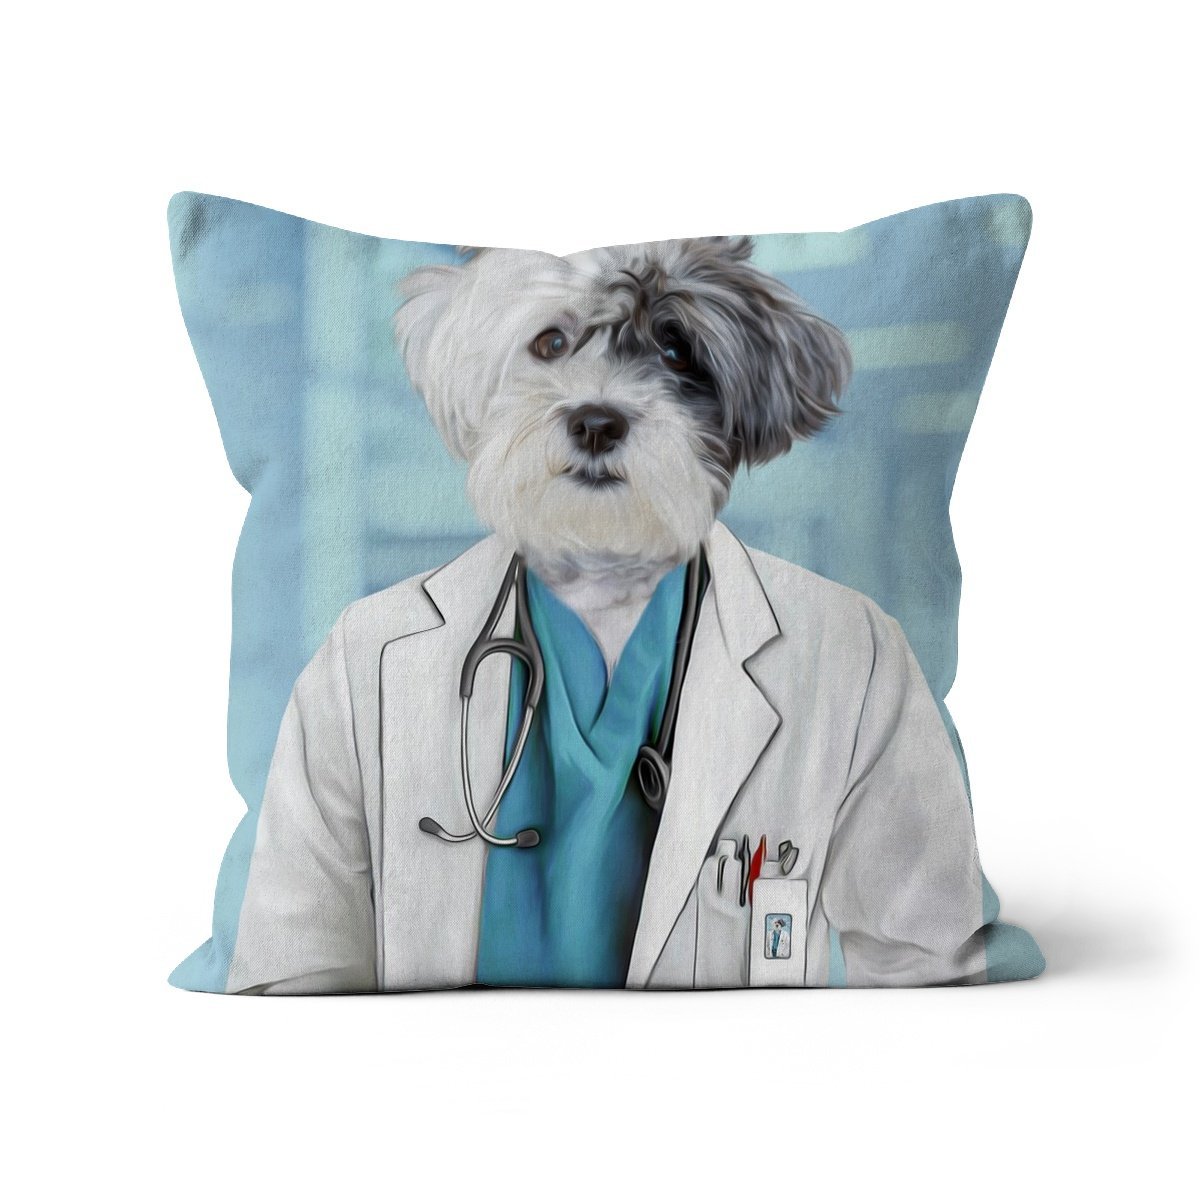 The Doctor: Custom Pet Throw Pillow - Paw & Glory - #pet portraits# - #dog portraits# - #pet portraits uk#paw and glory, pet portraits cushion,dog on pillow, custom cat pillows, pet pillow, custom pillow of pet, pillow personalized